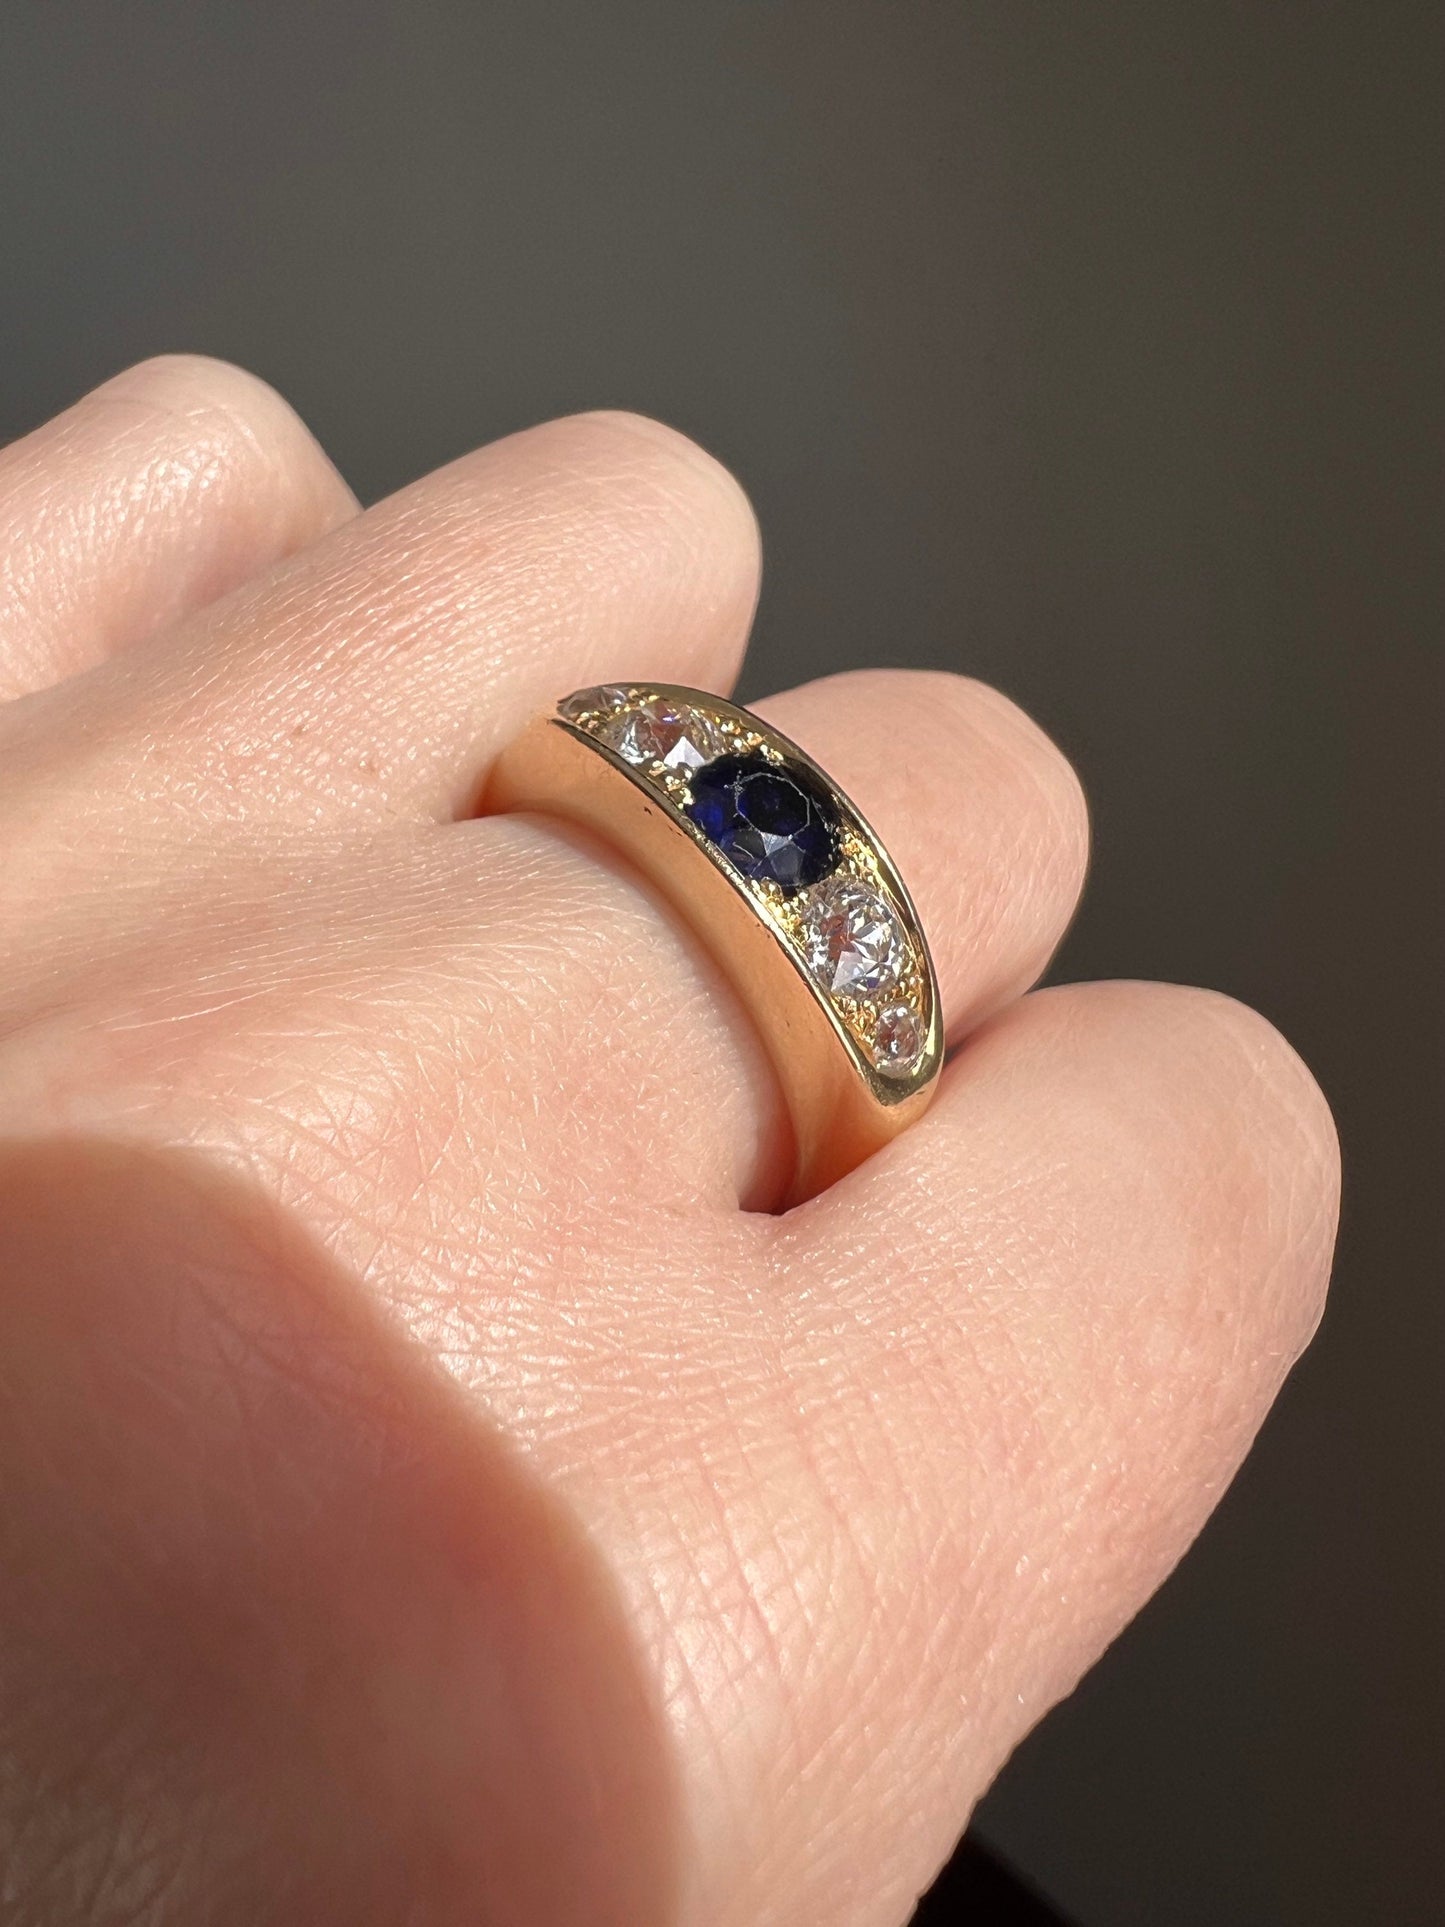 HEAVY Five Stone Gypsy Band Ring .75 Carat Old Mine Cut DIAMOND Sapphire French Antique 9.6g 18k GoLD Victorian Belle Epoque Unique Gift OMC